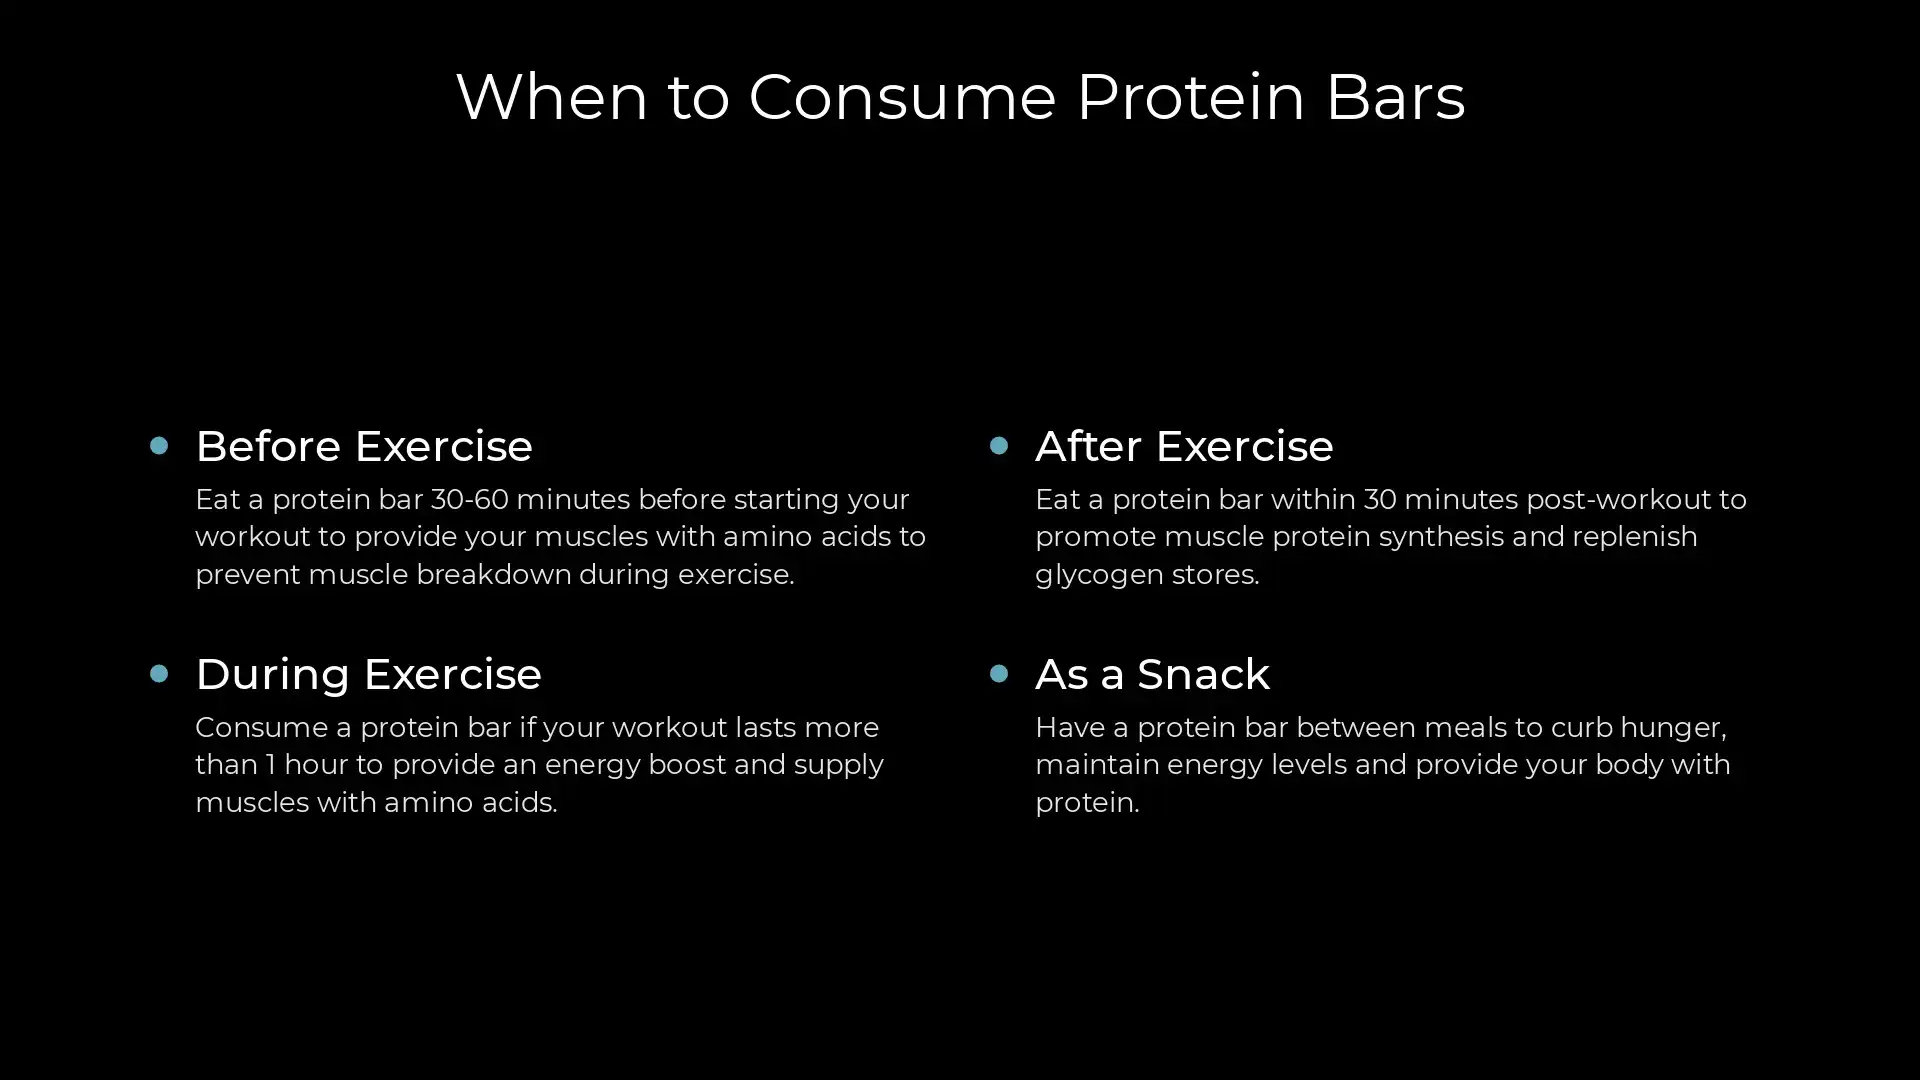 Protein Bars in Athletic Training Slide 7